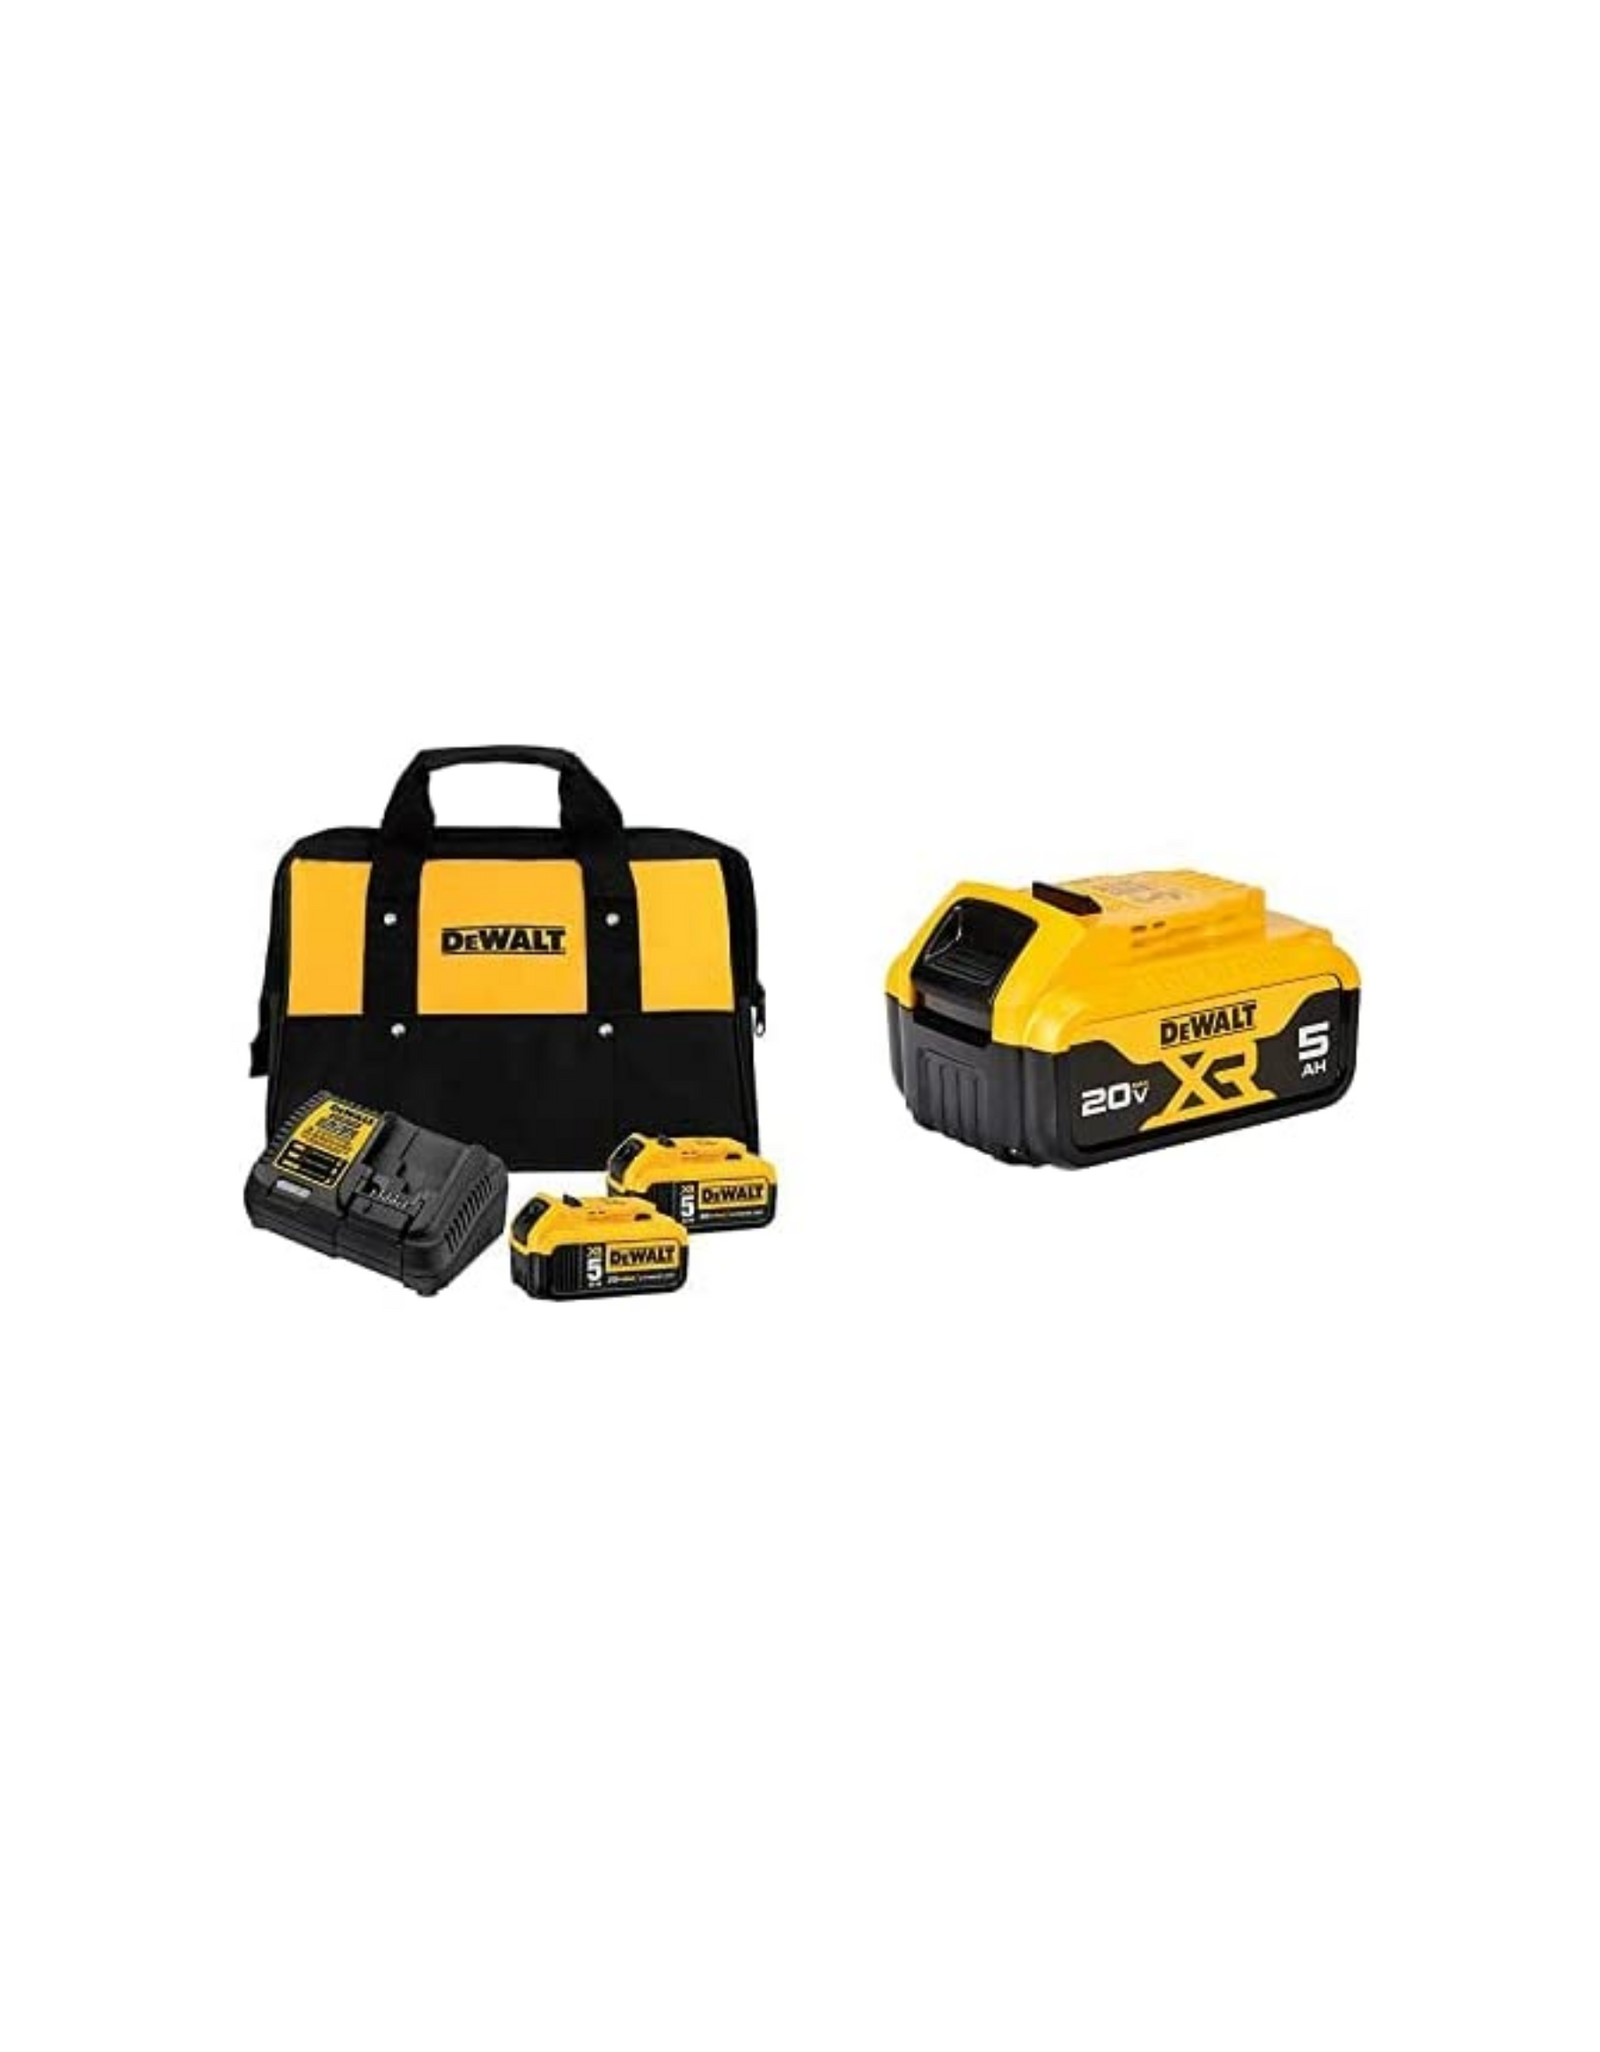 DEWALT DCB205-2CK 20V Max 5.0Ah Starter Kit with 2 Lithium Ion Batteries and DCB205 20V MAX XR Battery, Lithium Ion, 5.0Ah